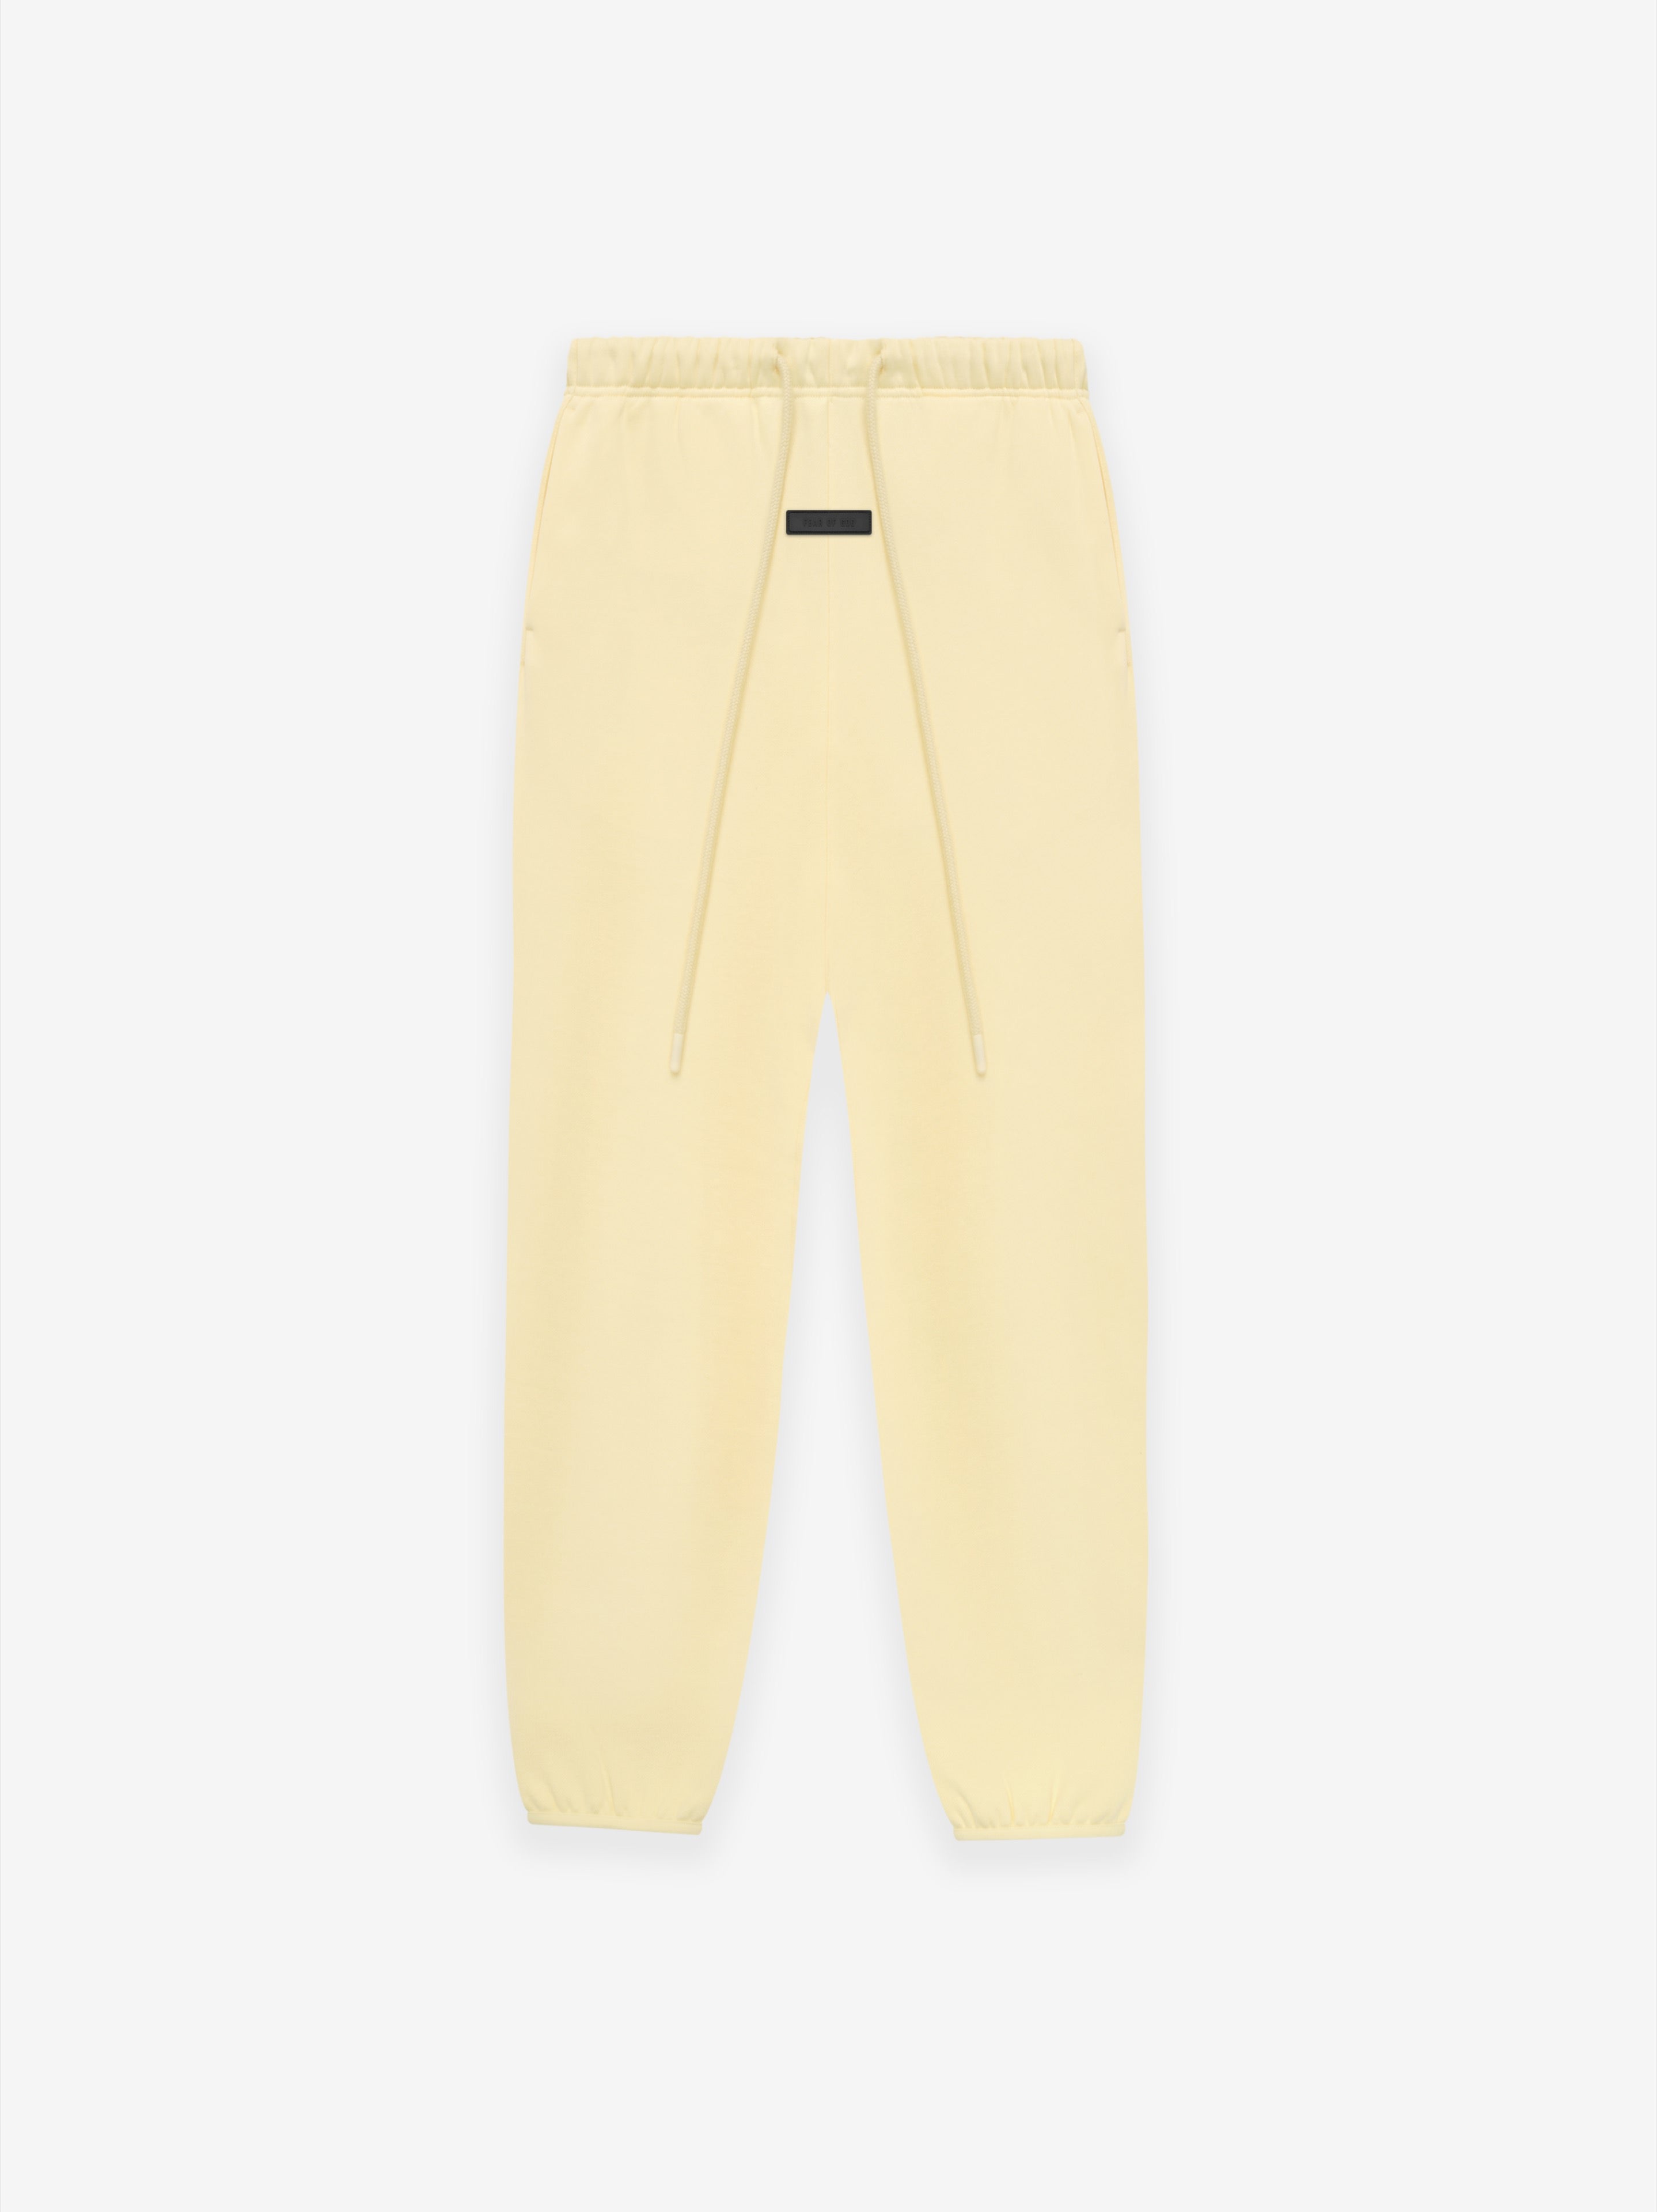 Buy Fear of God Essentials women thermal black pant for $98 online